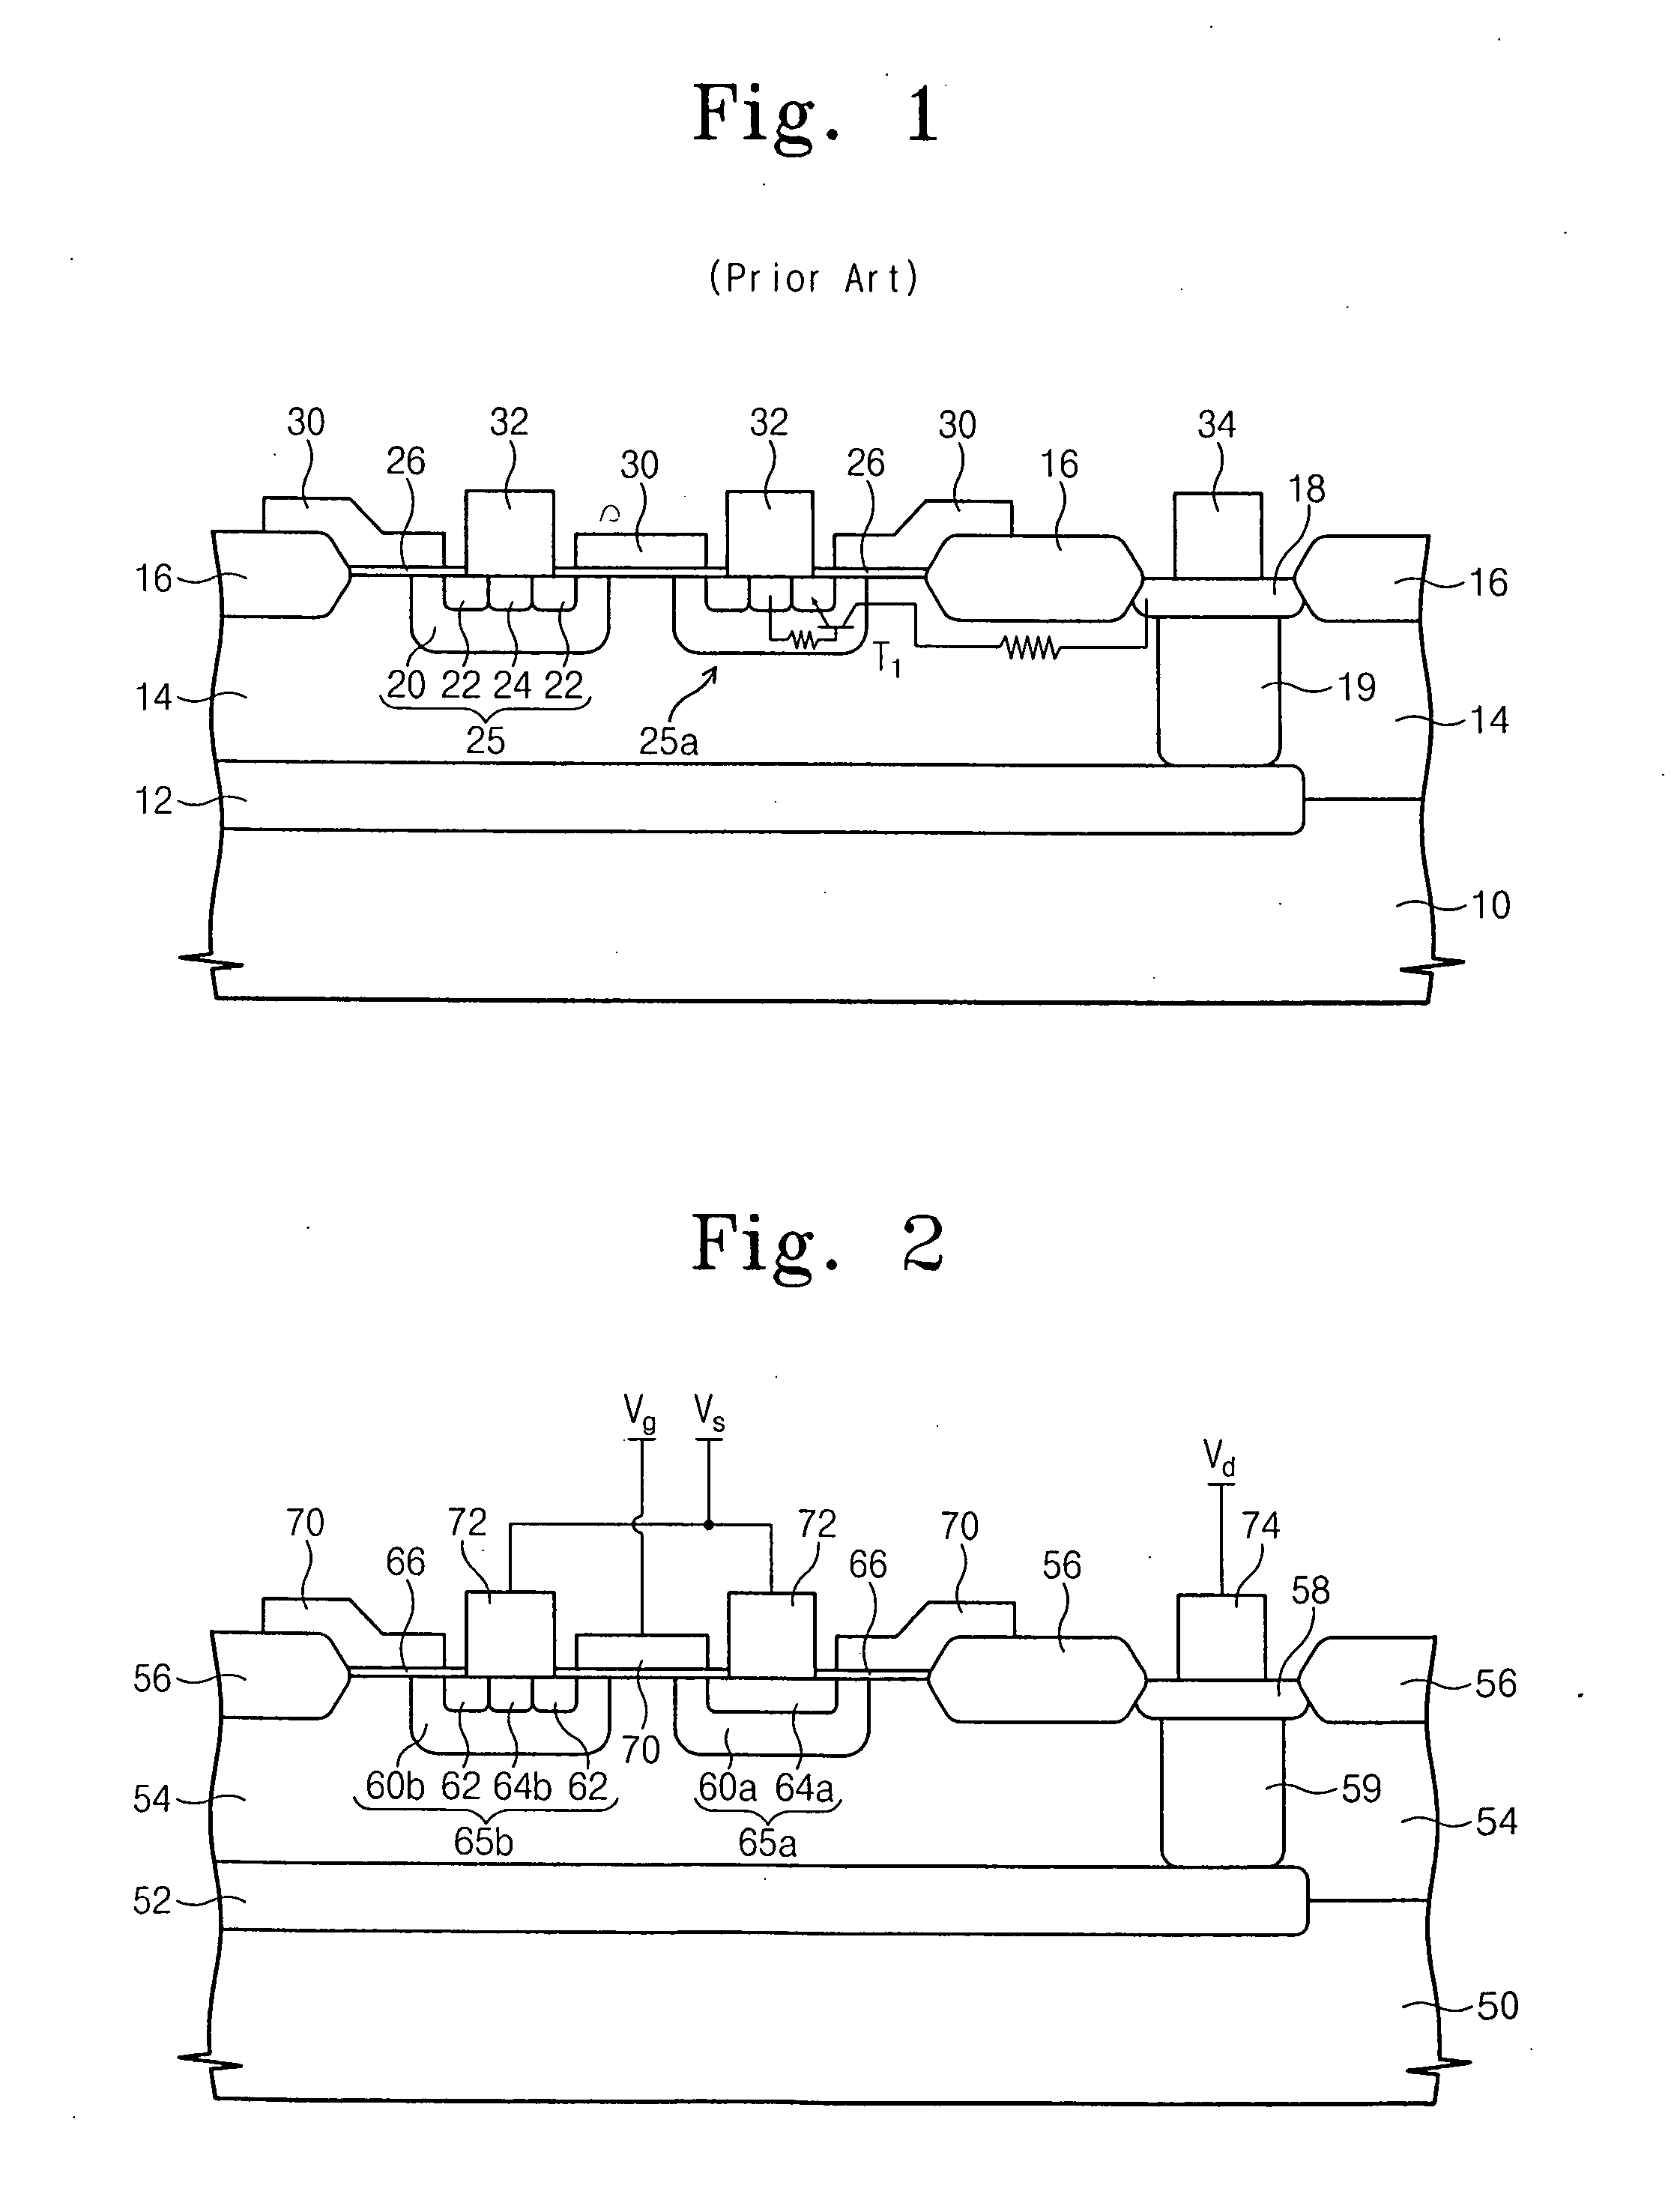 Vertical double-diffused metal oxide semiconductor (VDMOS) device incorporating reverse diode